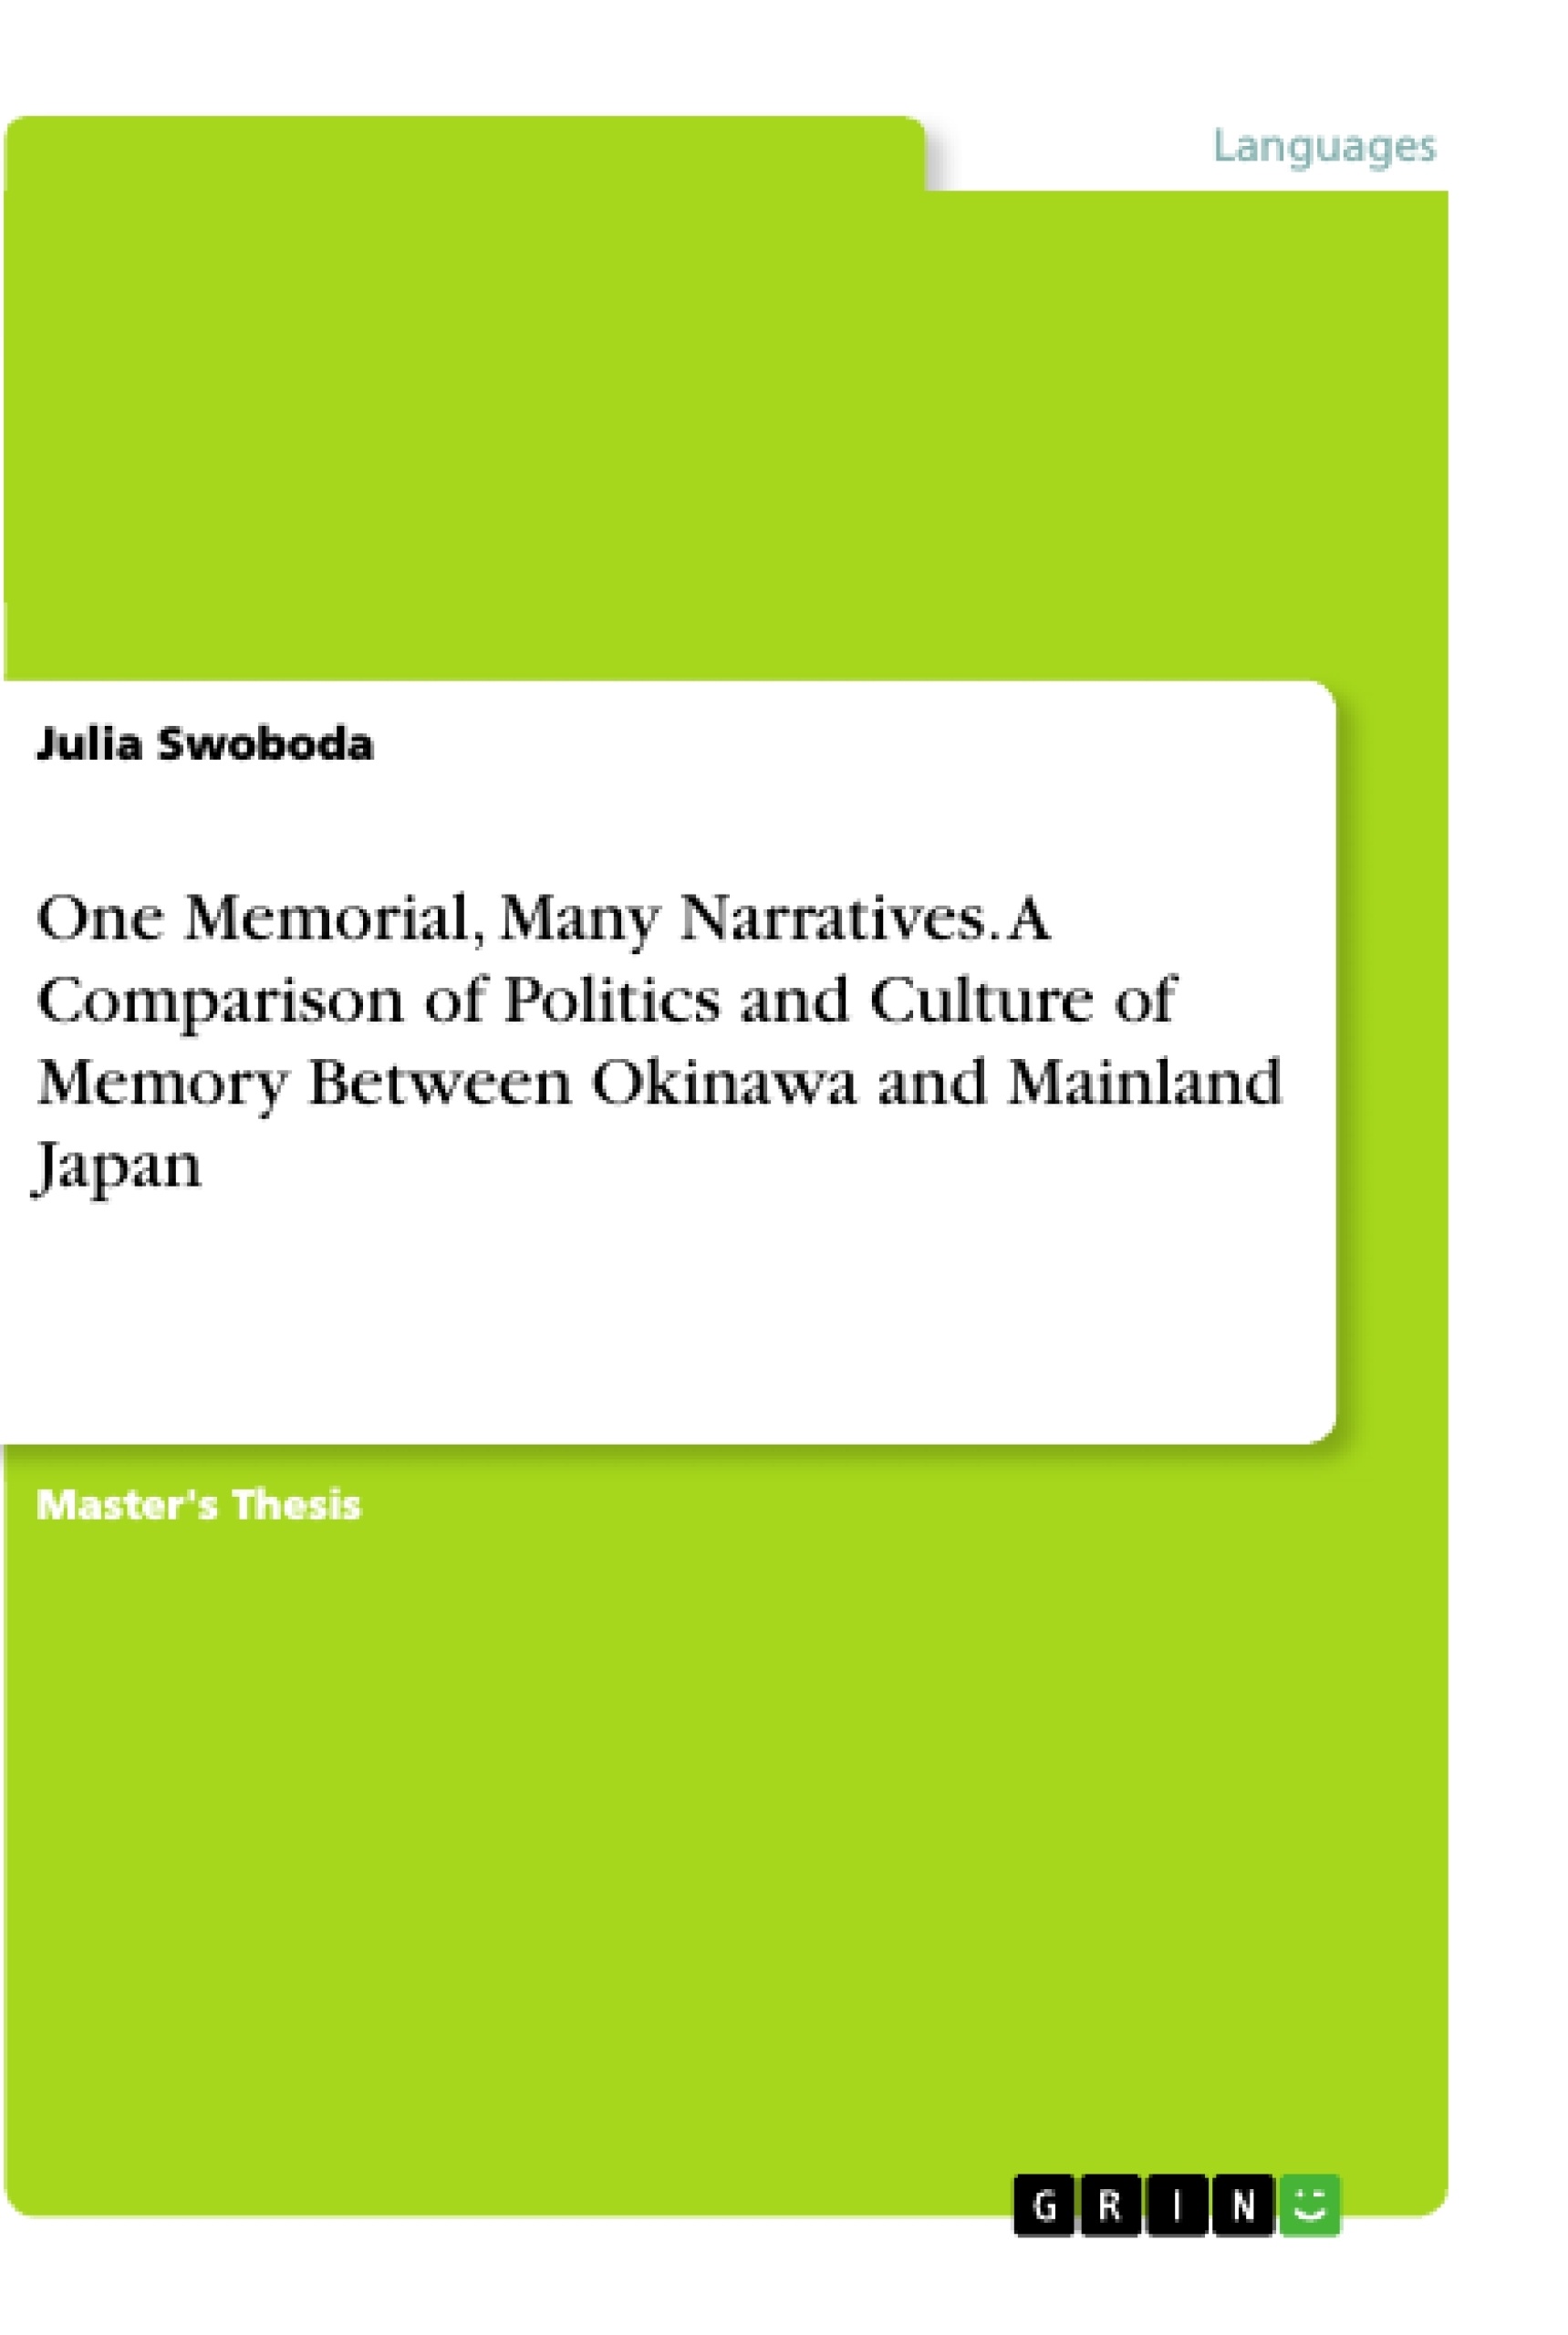 Título: One Memorial, Many Narratives. A Comparison of Politics and Culture of Memory Between Okinawa and Mainland Japan